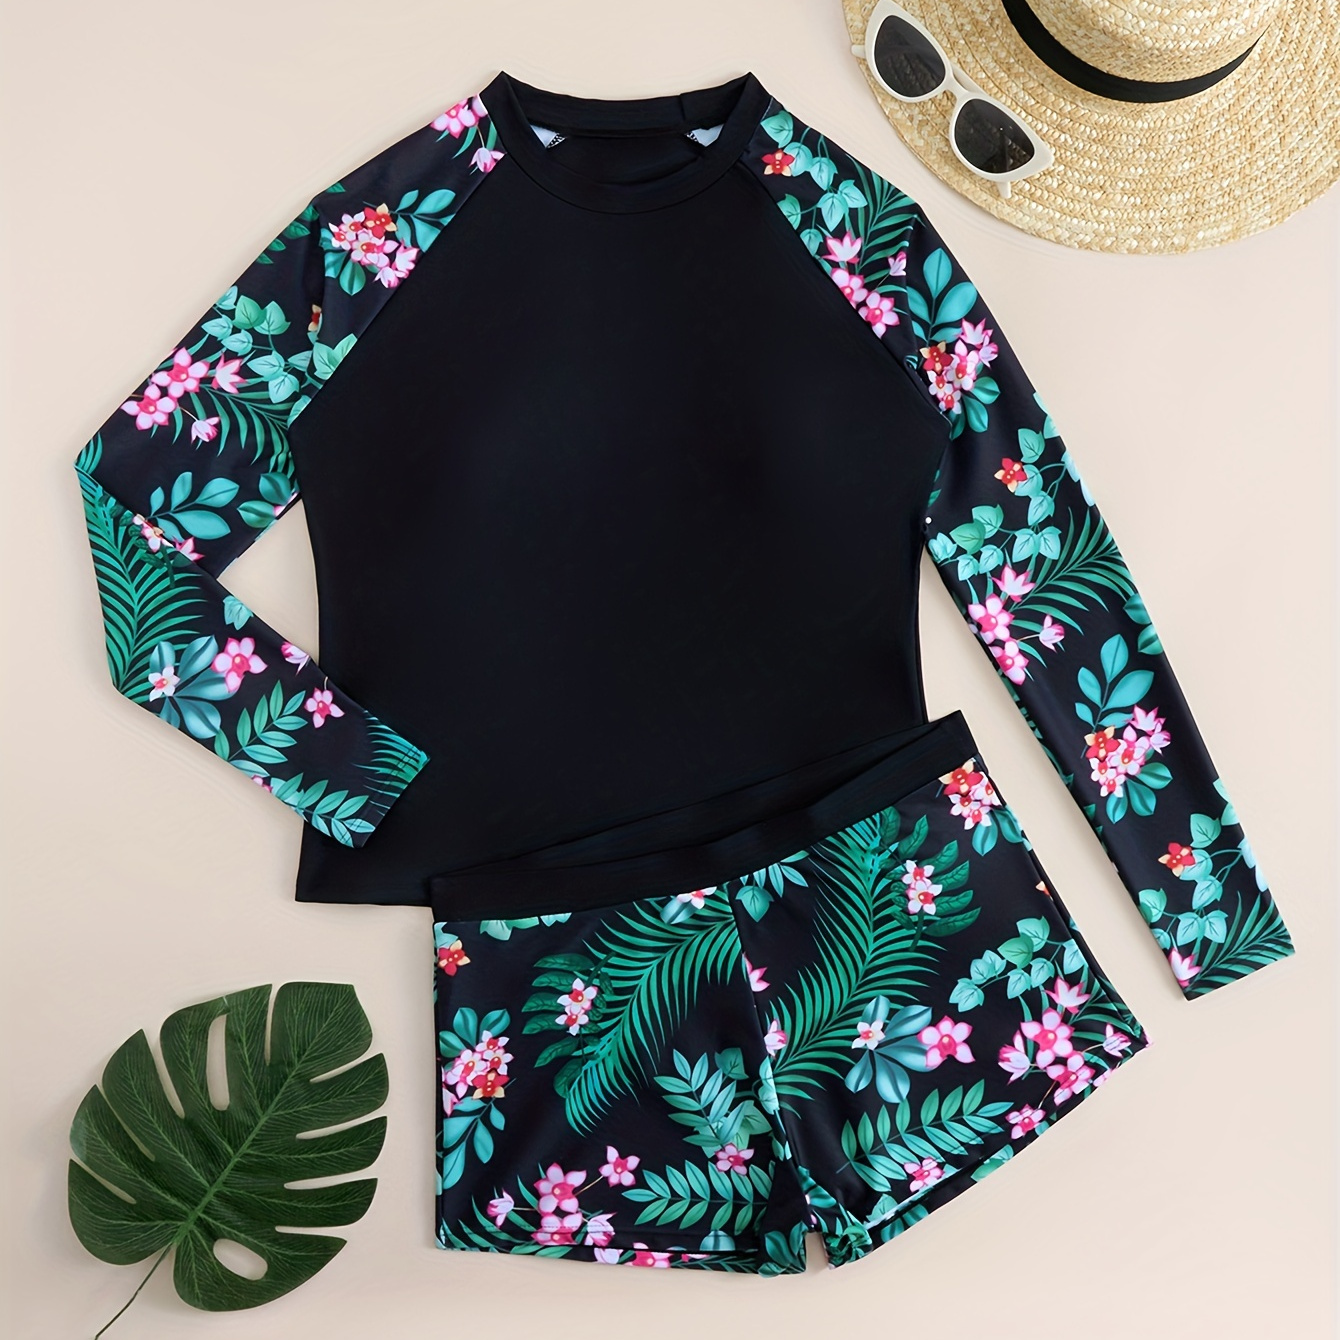 

Floral Print Crew Neck Long Sleeve 2 Piece Set Tankini, Color Block Stretchy Sport Tummy Control Boxer Shorts Swimsuit For Beach Pool Bathing Surfing, Women's Swimwear & Clothing